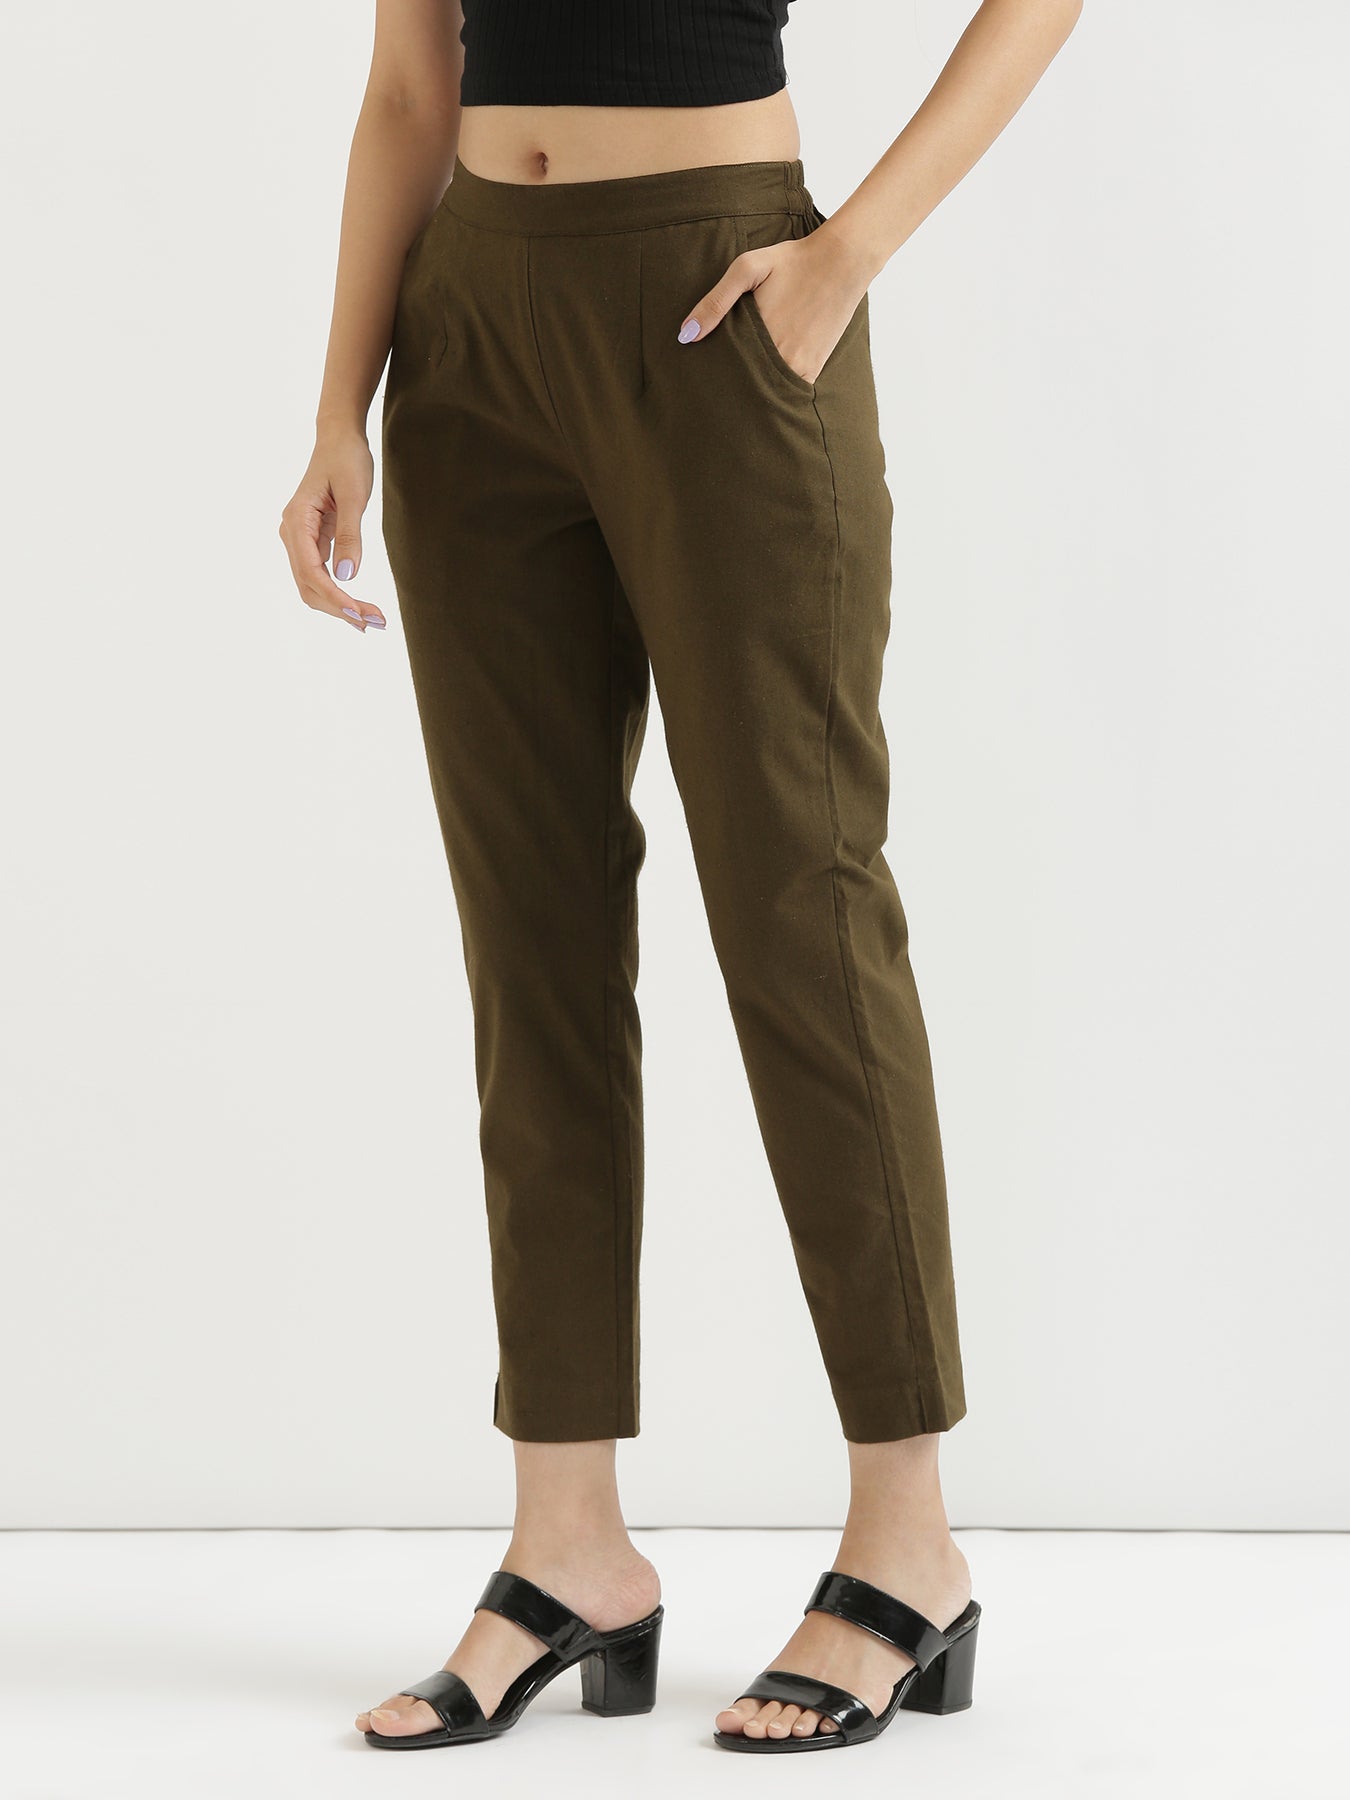 15 Olive Green Pant Outfit Ideas For Women (Comfy & Stylish) | Green pants  outfit, Olive green pants, Olive green pants outfit